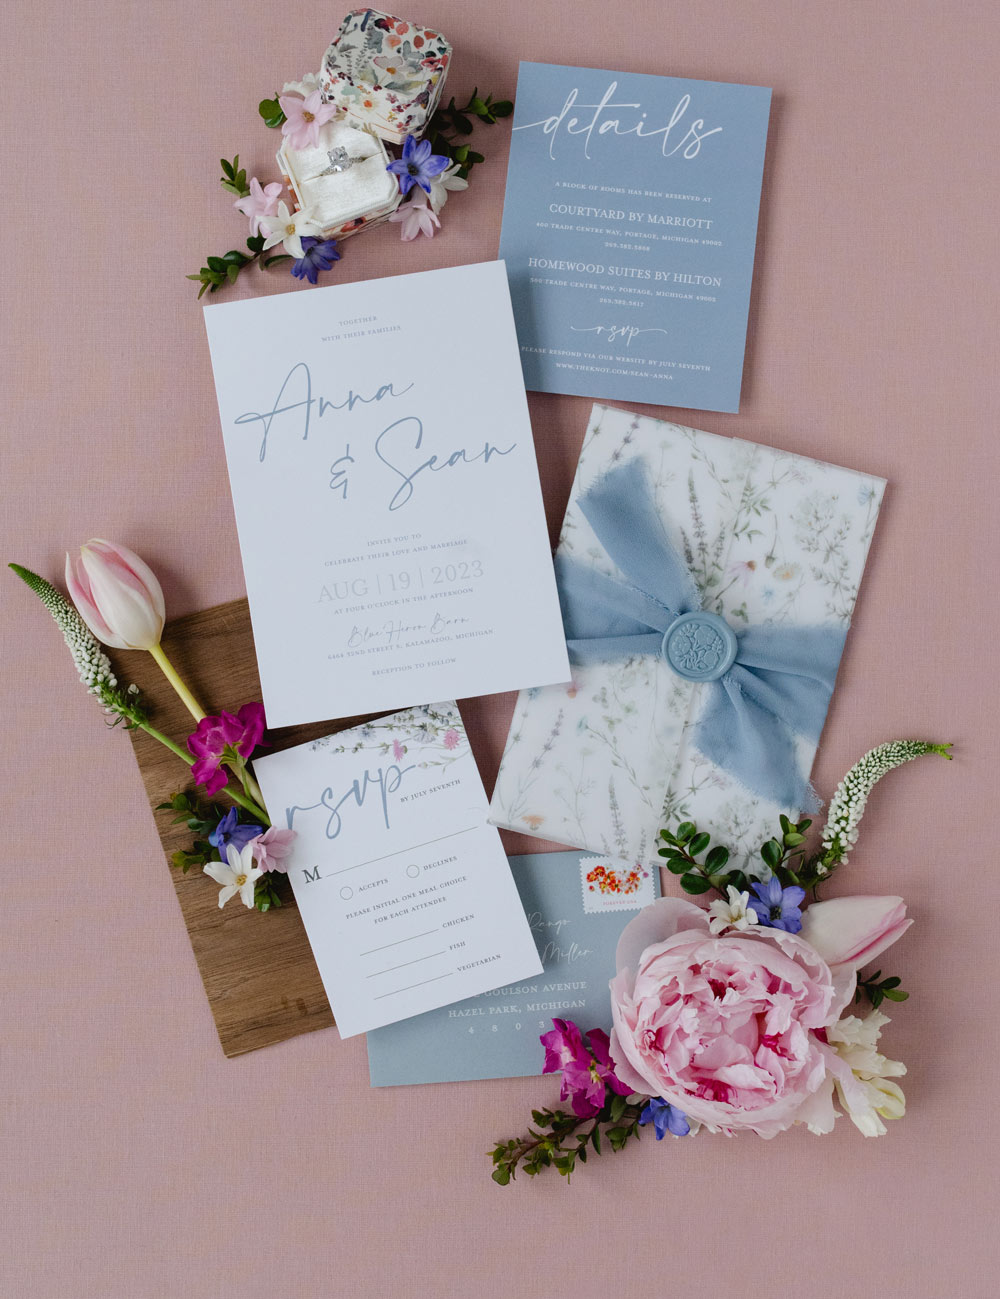 wedding invitations from Noteworthy by Design